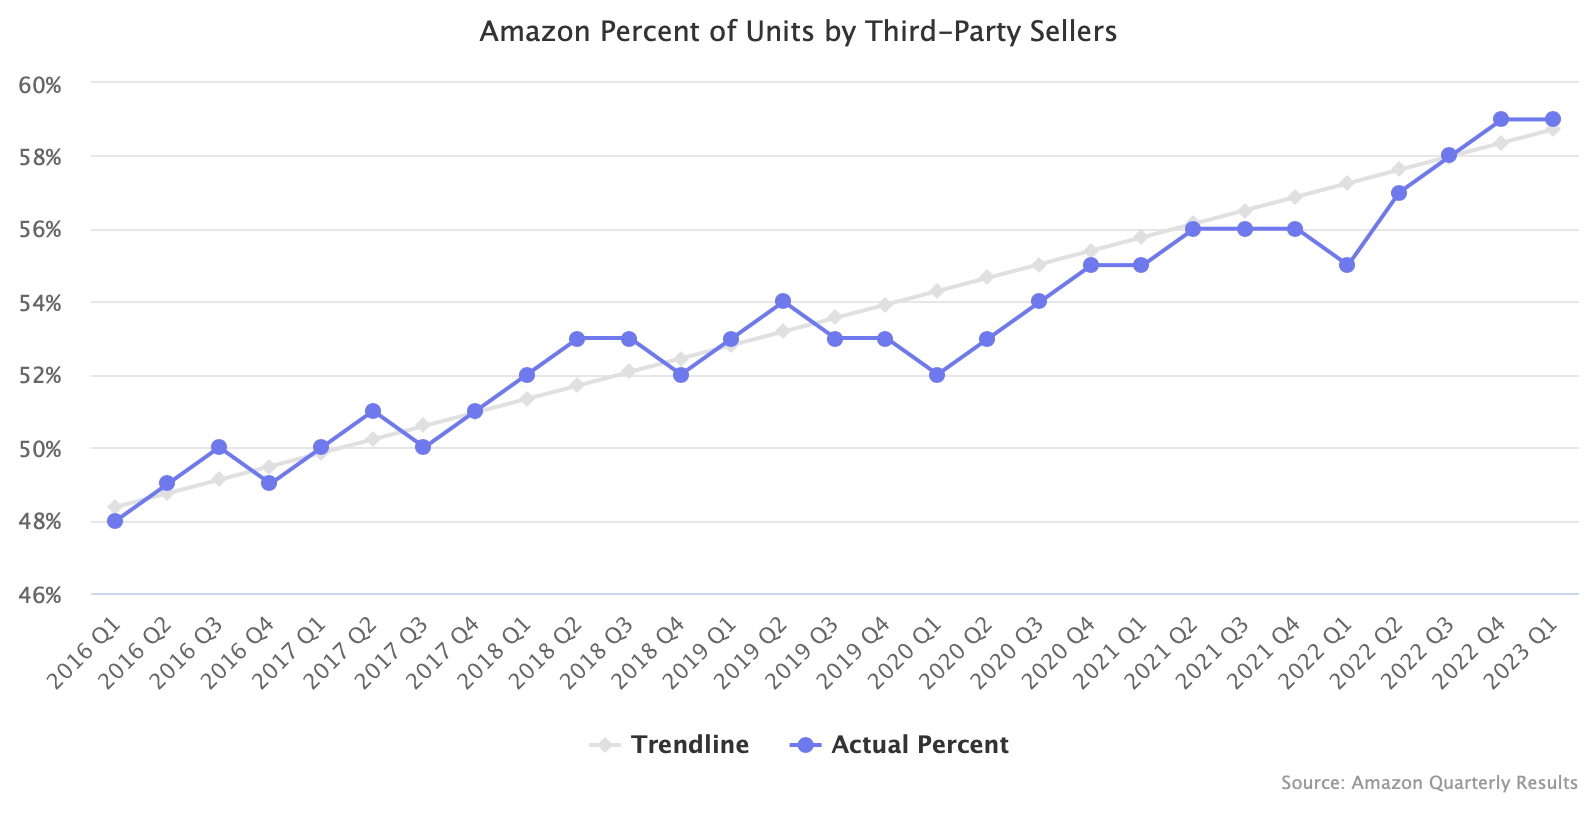 Amazon Percent of Units by Third-Party Sellers